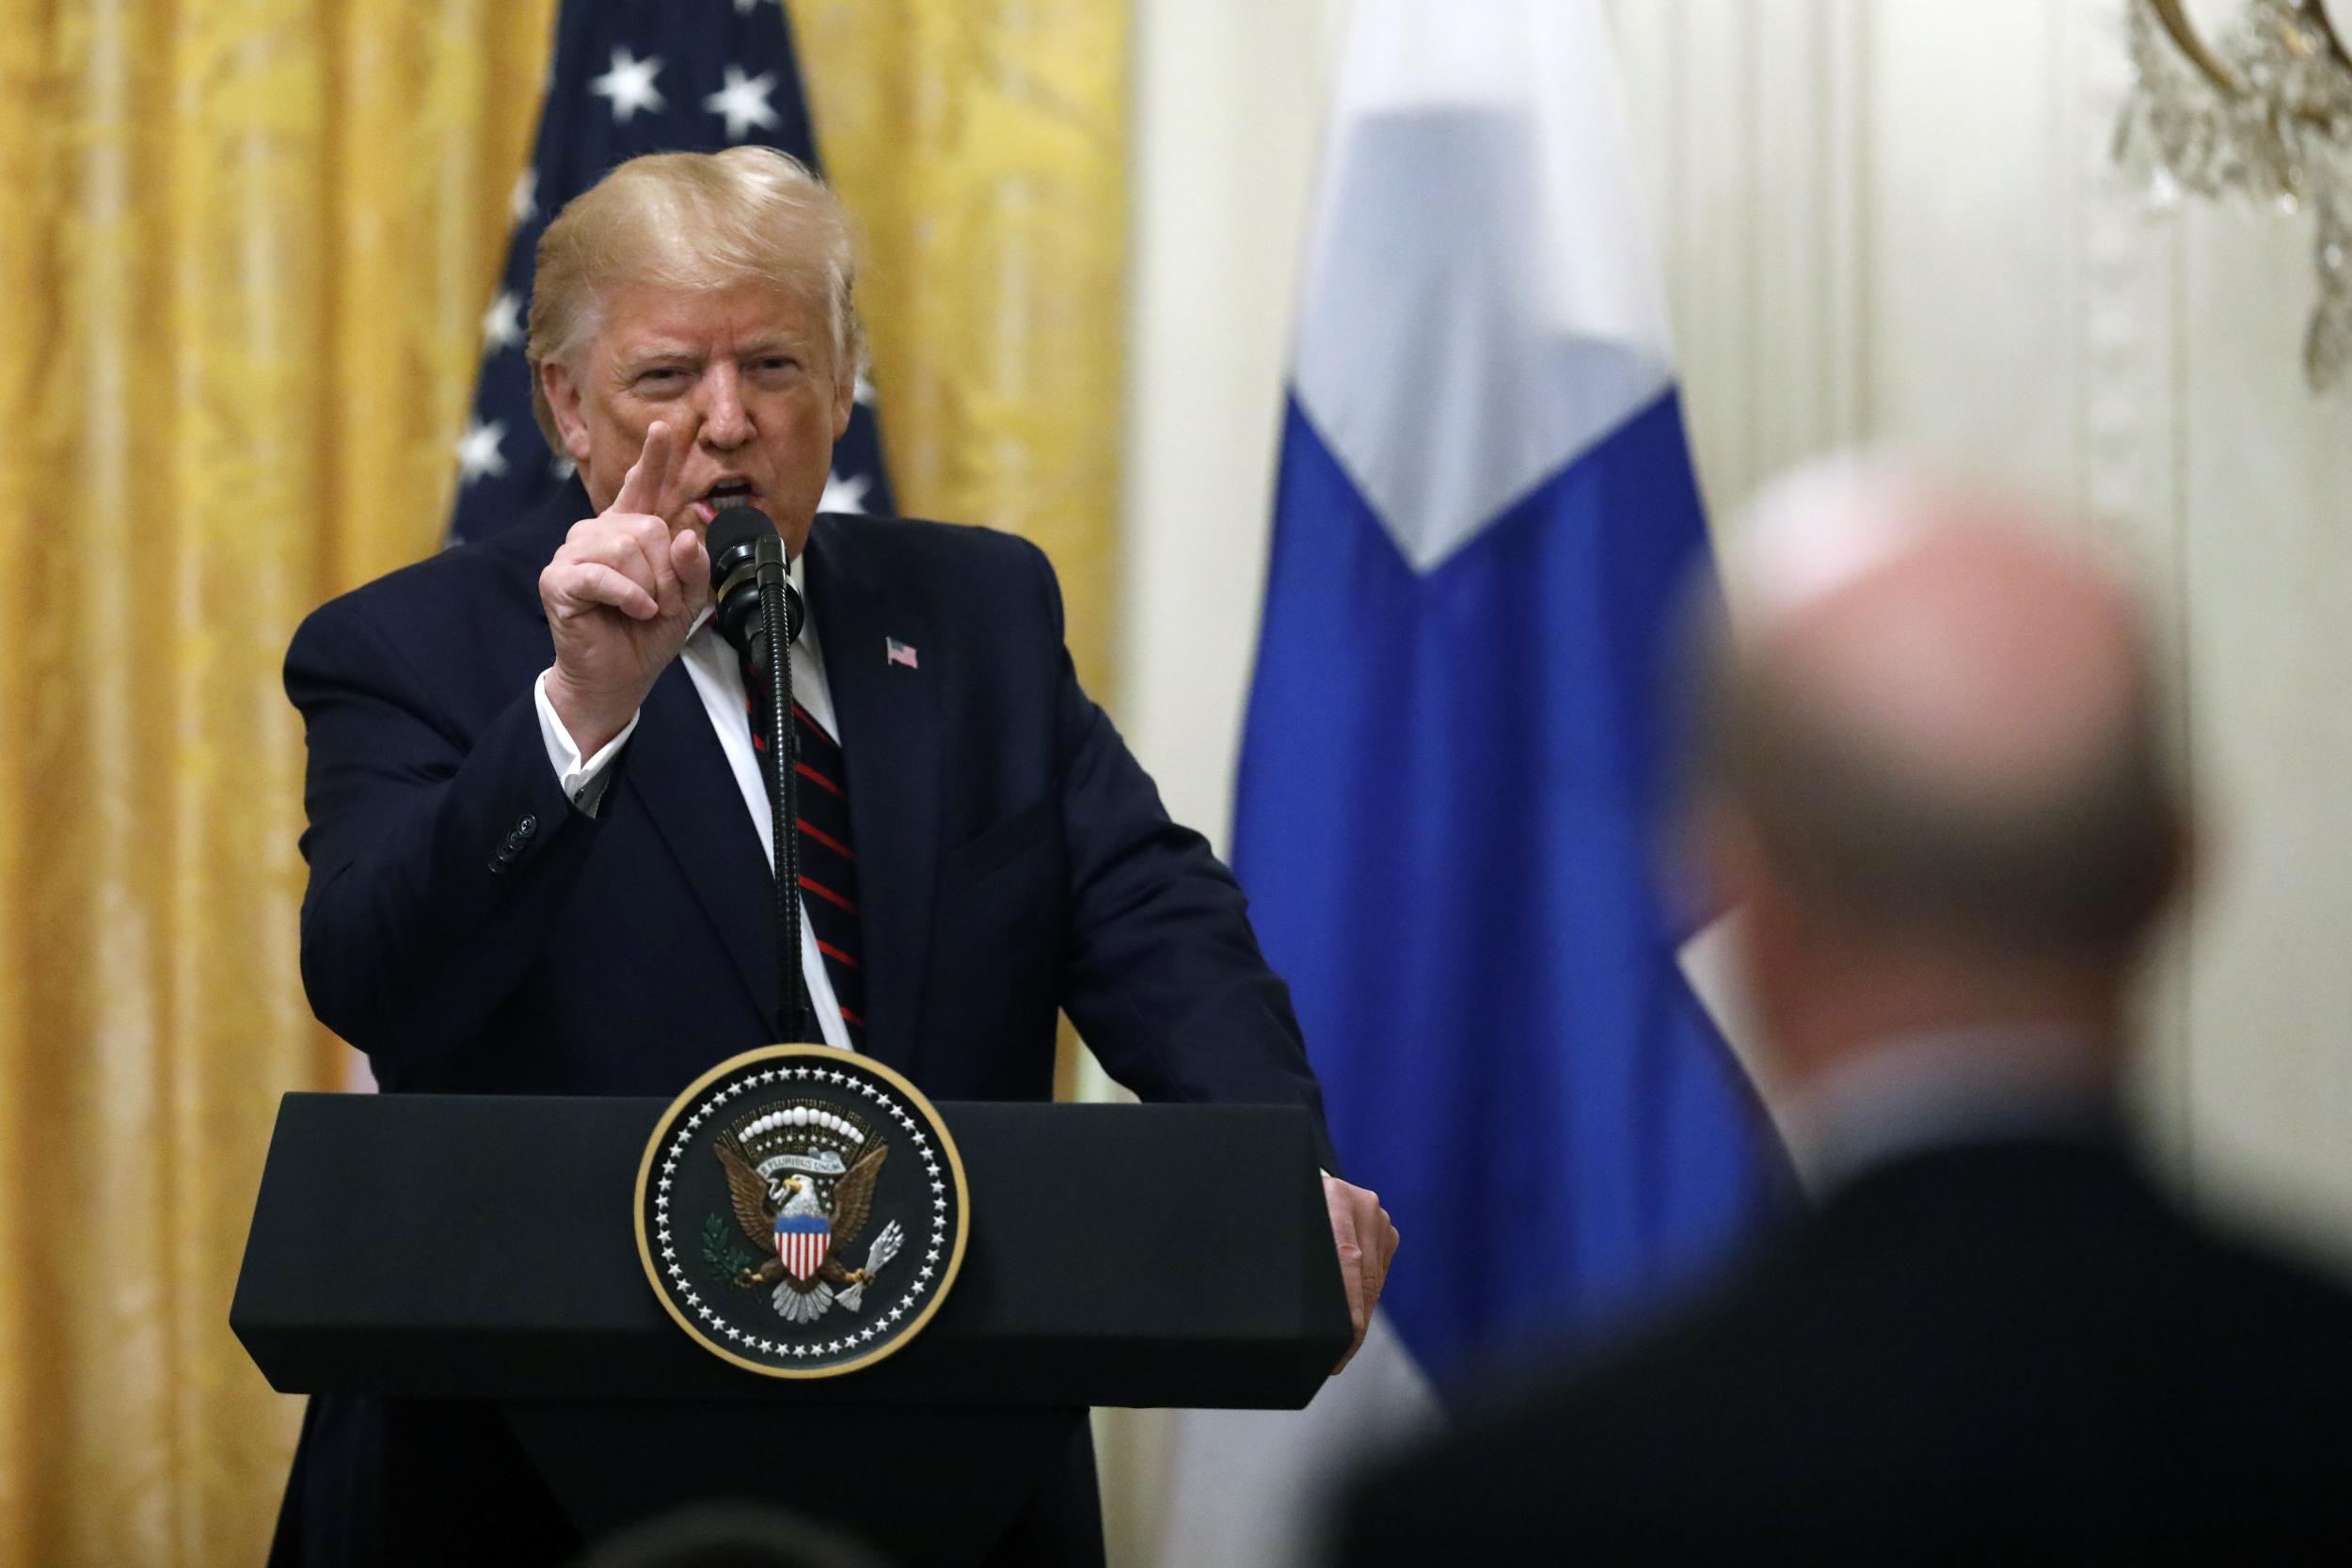 Trump flails wildly at 'lowlife' enemies as Democrats increase pressure on impeachment